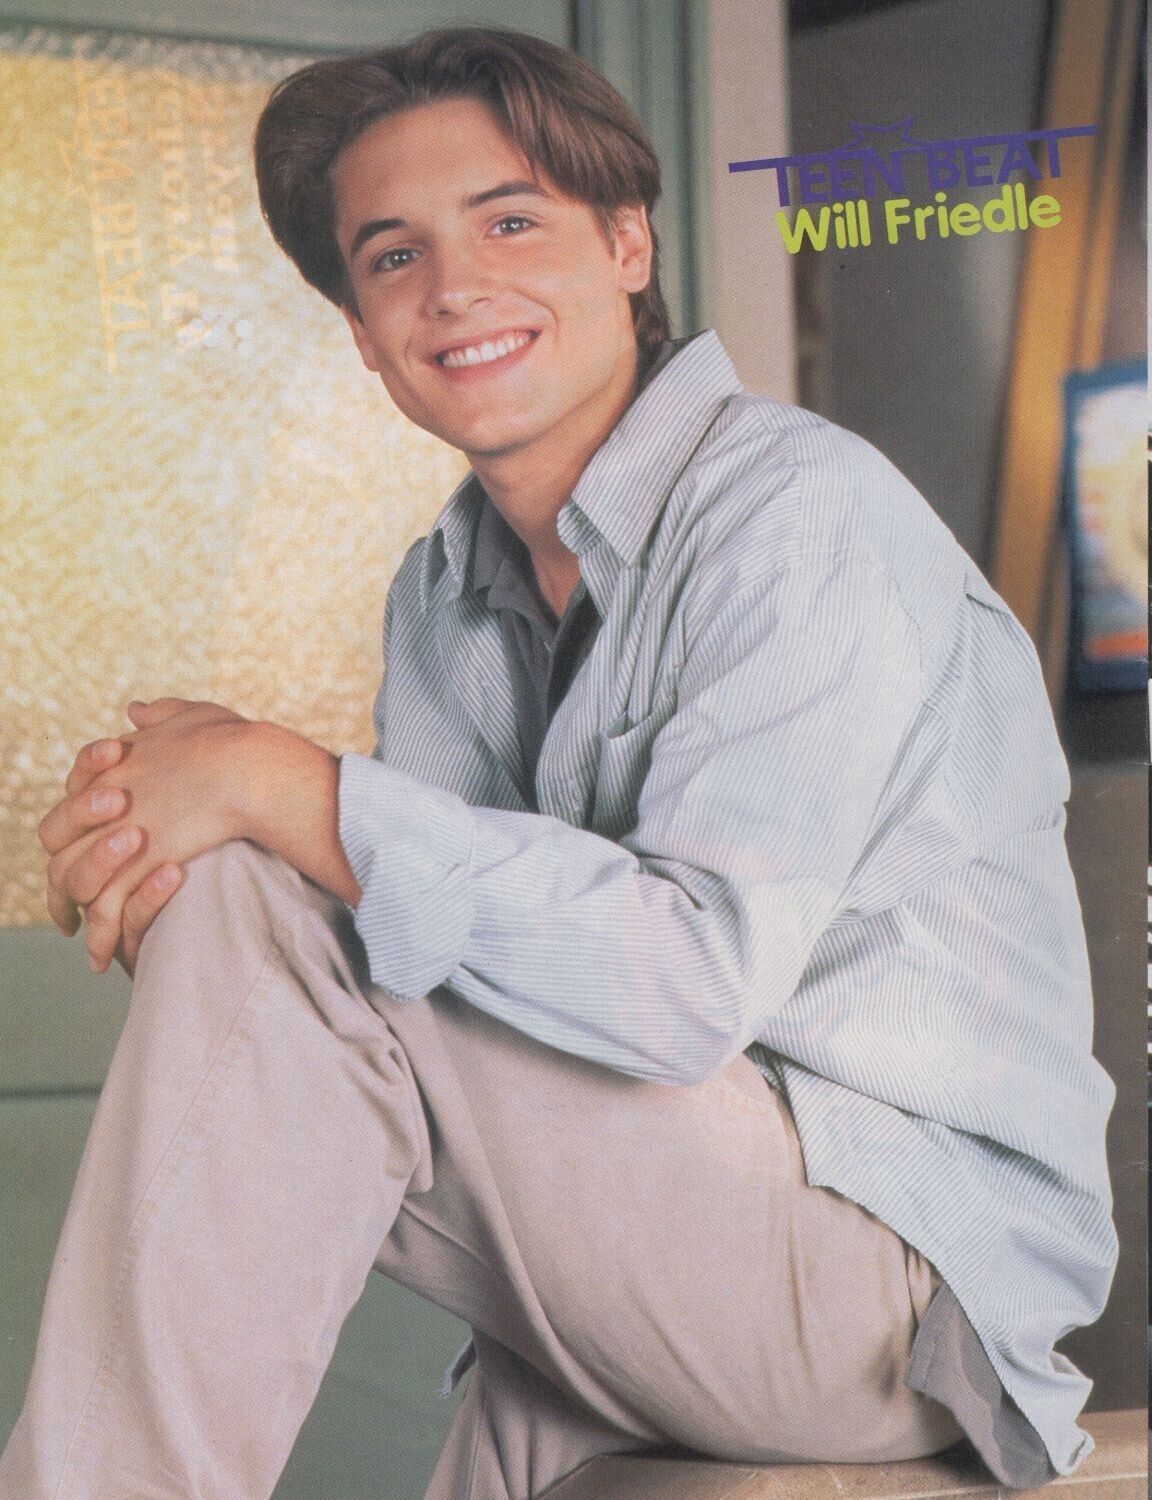 Will Friedle pinup Zachery Ty Bryan soccer ball picture Home Improvement Brad